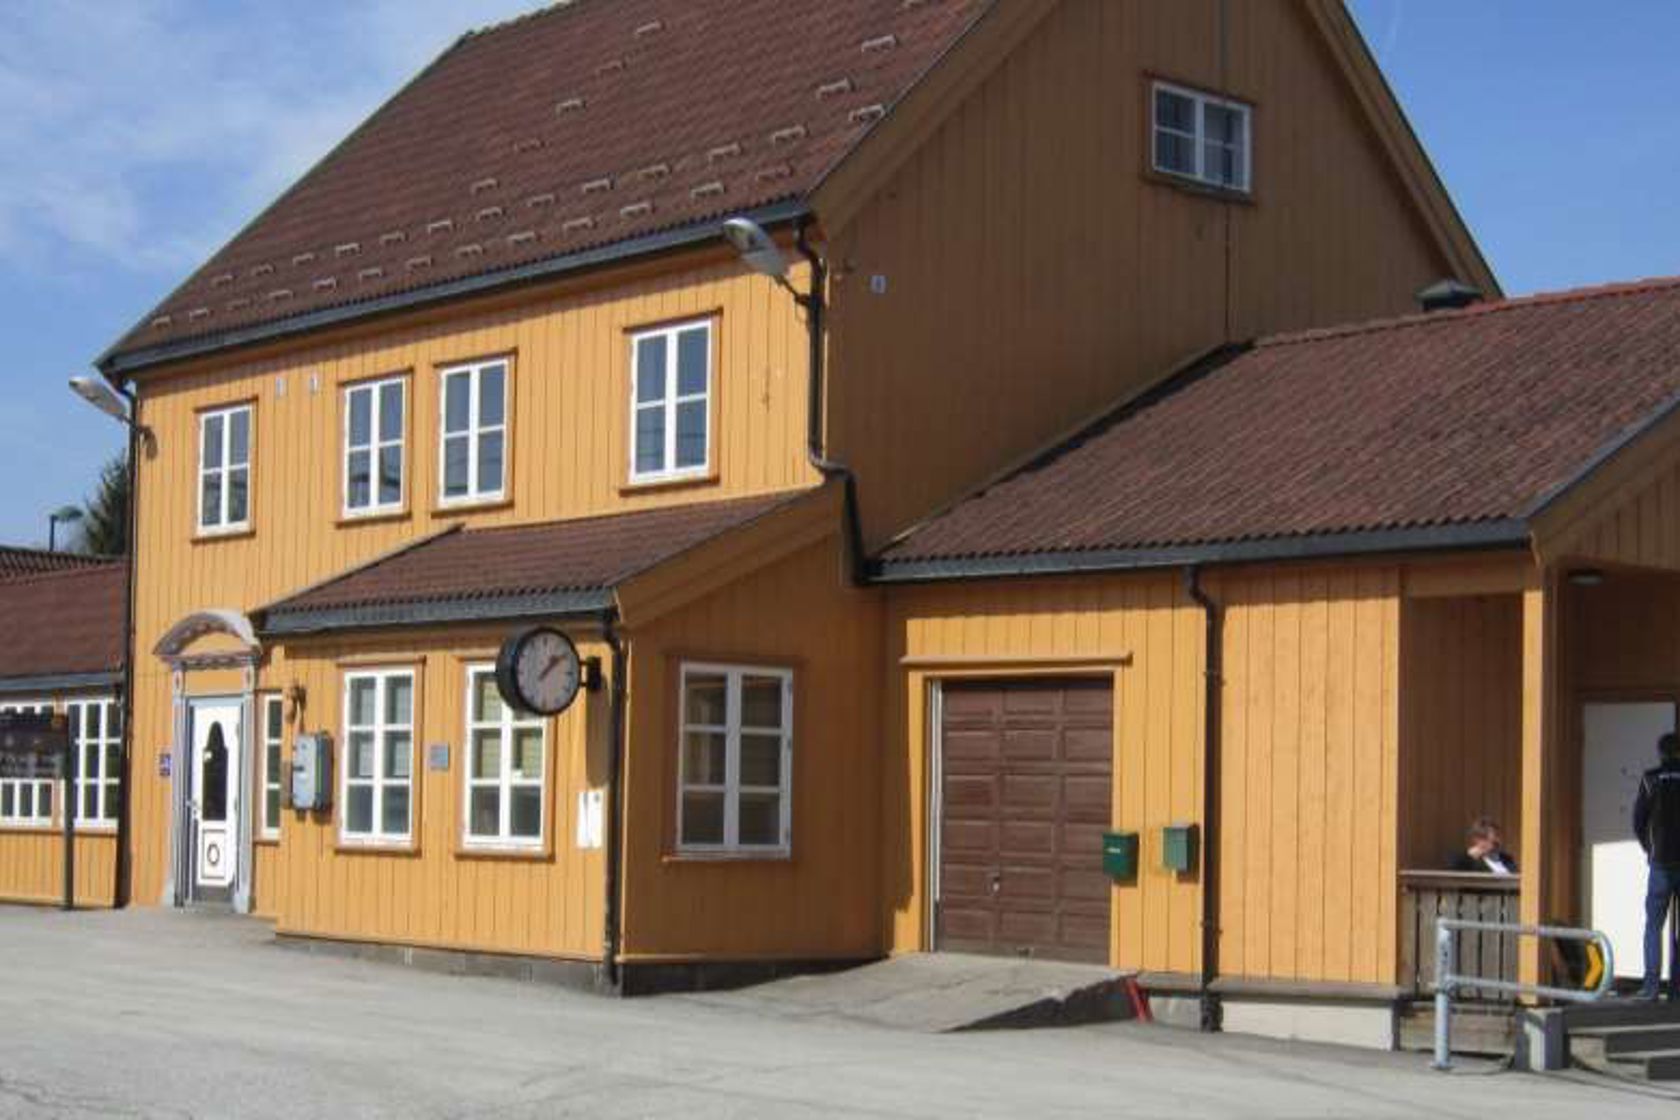 Exterior view of Bø station